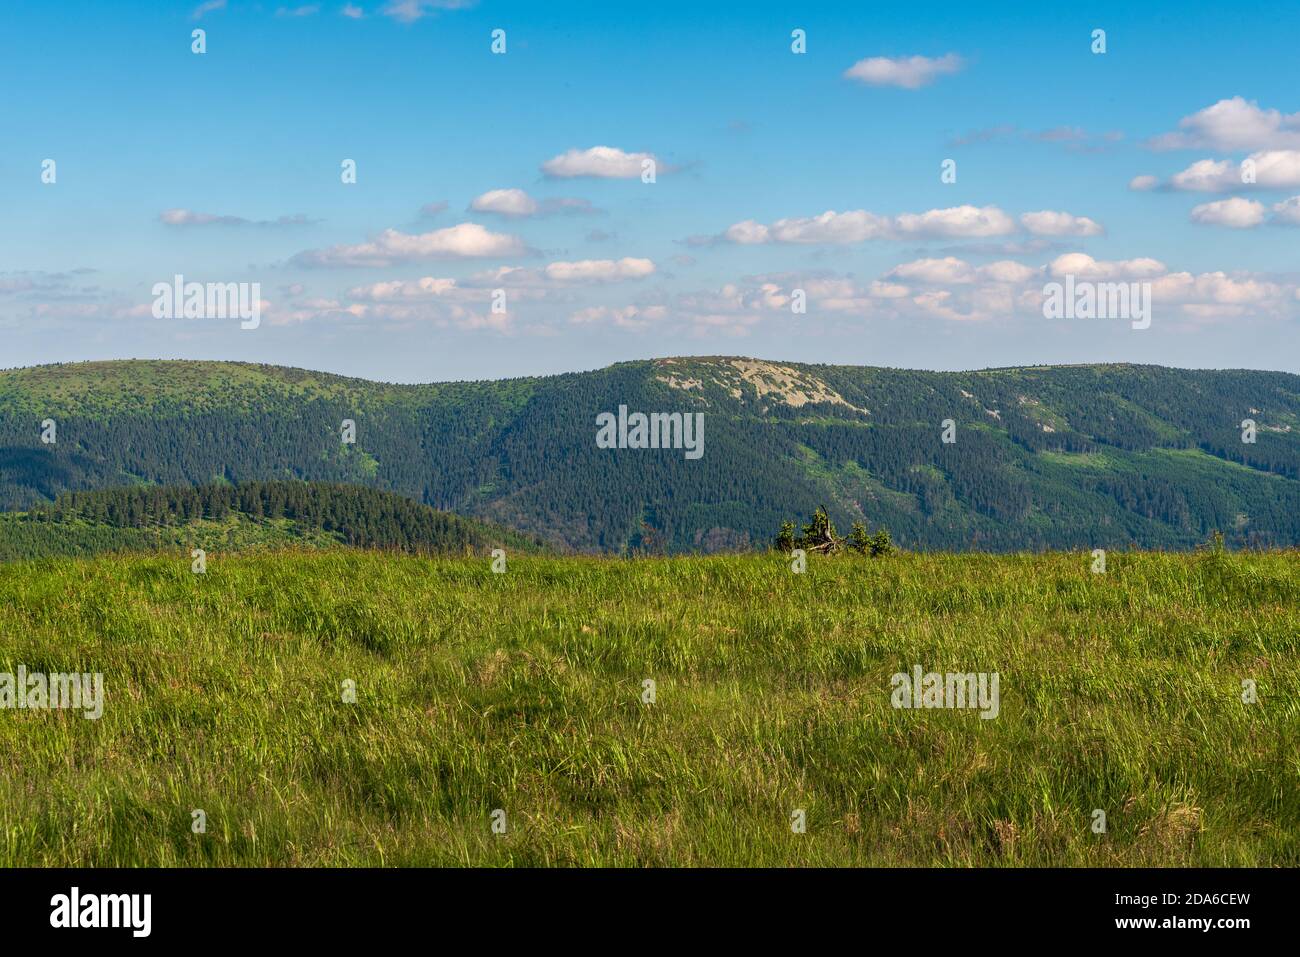 Jeleni hrbet, Bridlicna and Pecny hills from Mravanecnik hill summit in Jeseniky mountains in Czech republic during beautiful summer evening Stock Photo